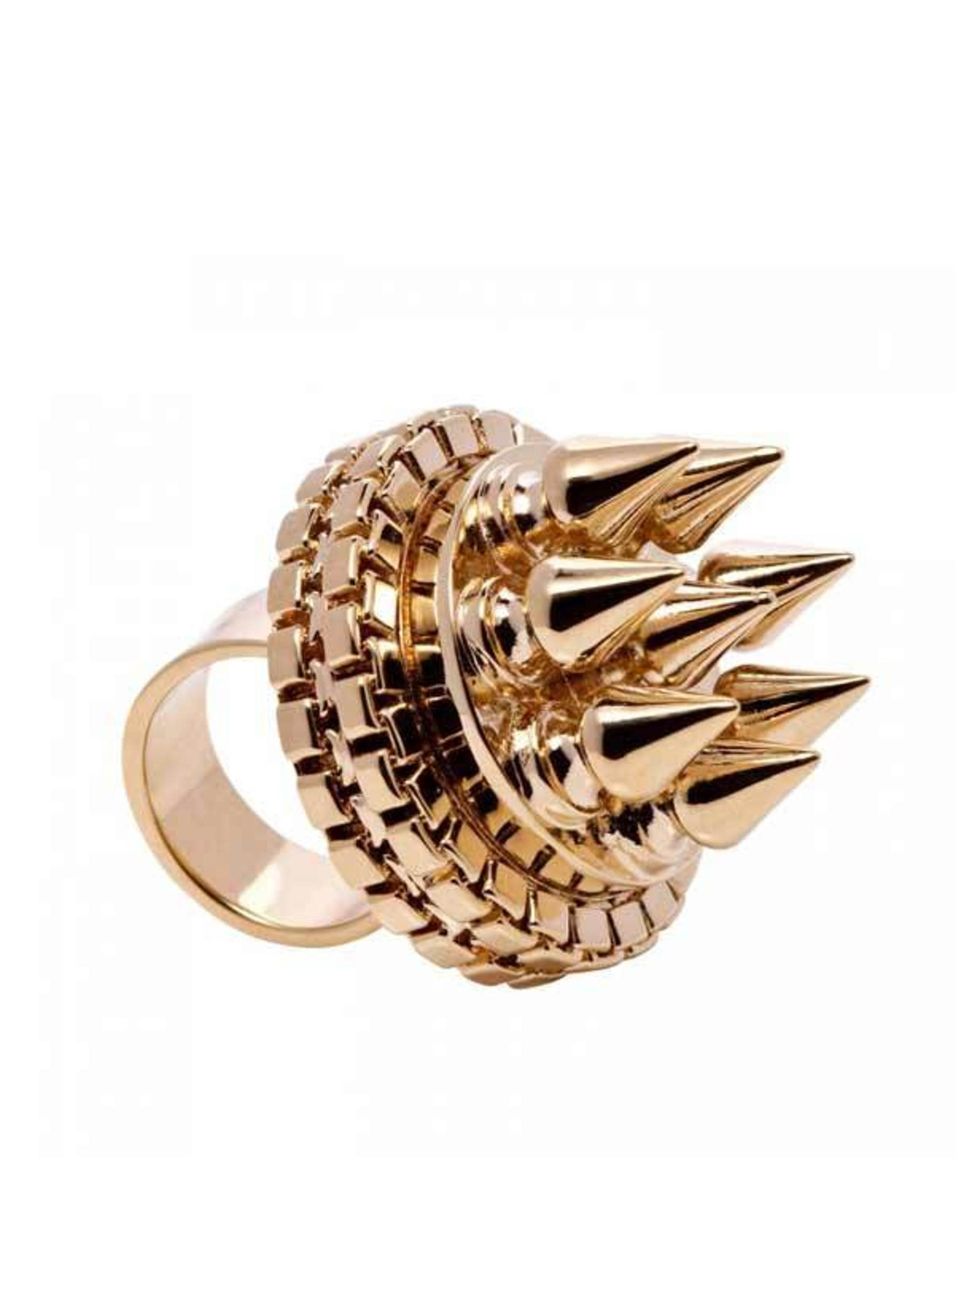 <p><a href="http://www.mawi.co.uk/onlinestore.html">Mawi</a> Rajah crown ring, £243</p>